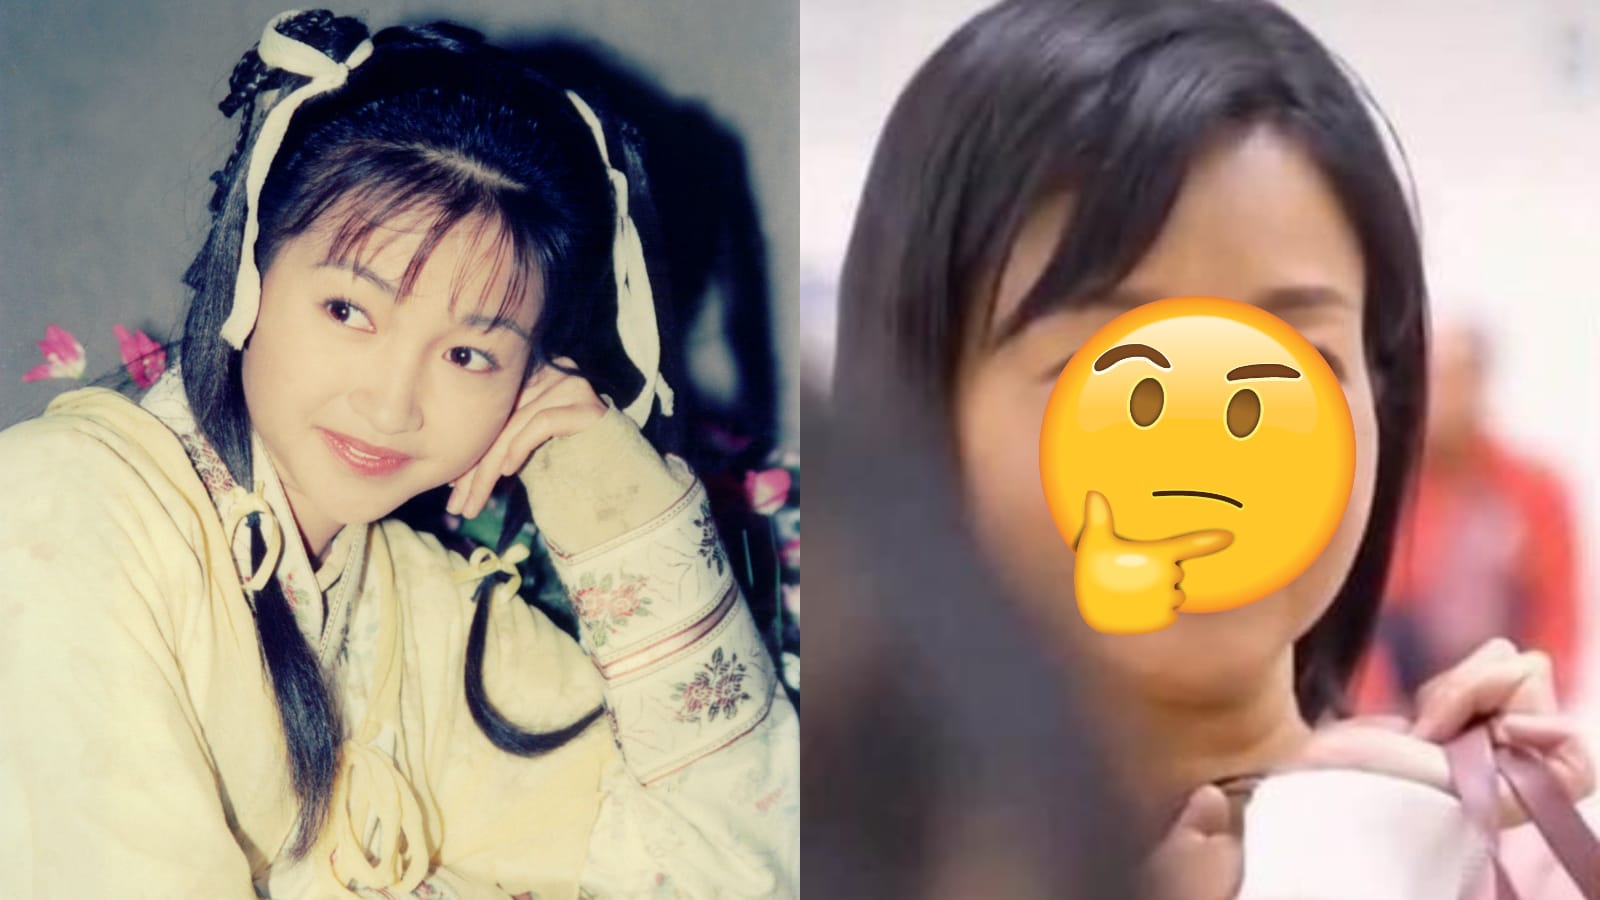 Fans Defend '90s Actress Theresa Lee, 50, Against Age Shaming Comments After Recent Pics Surface